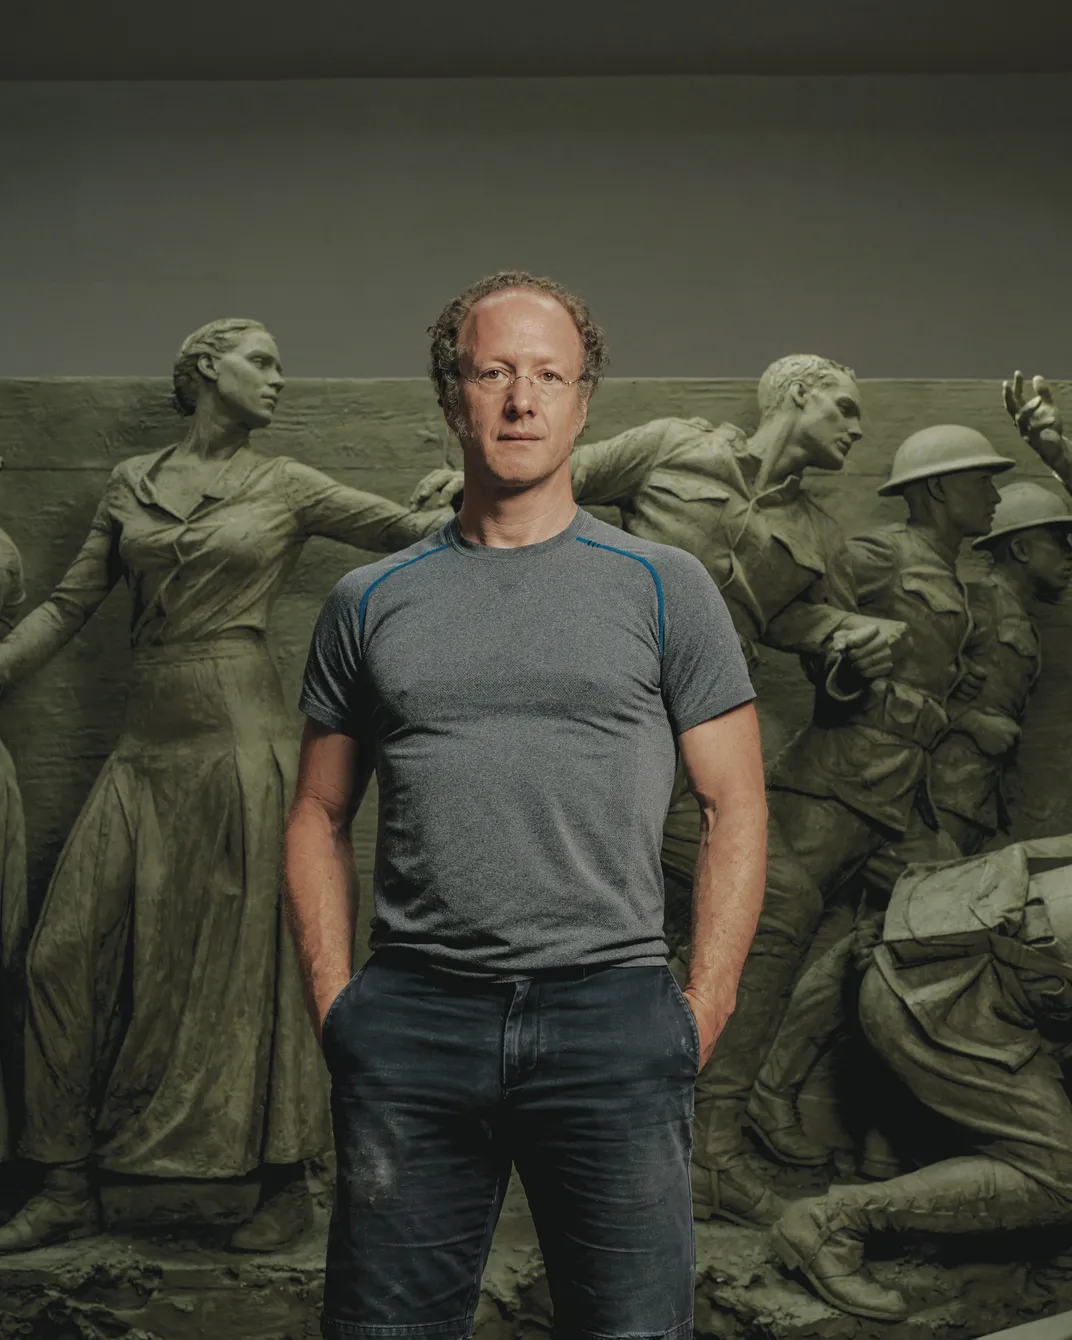 a man in front of large scale scultpures